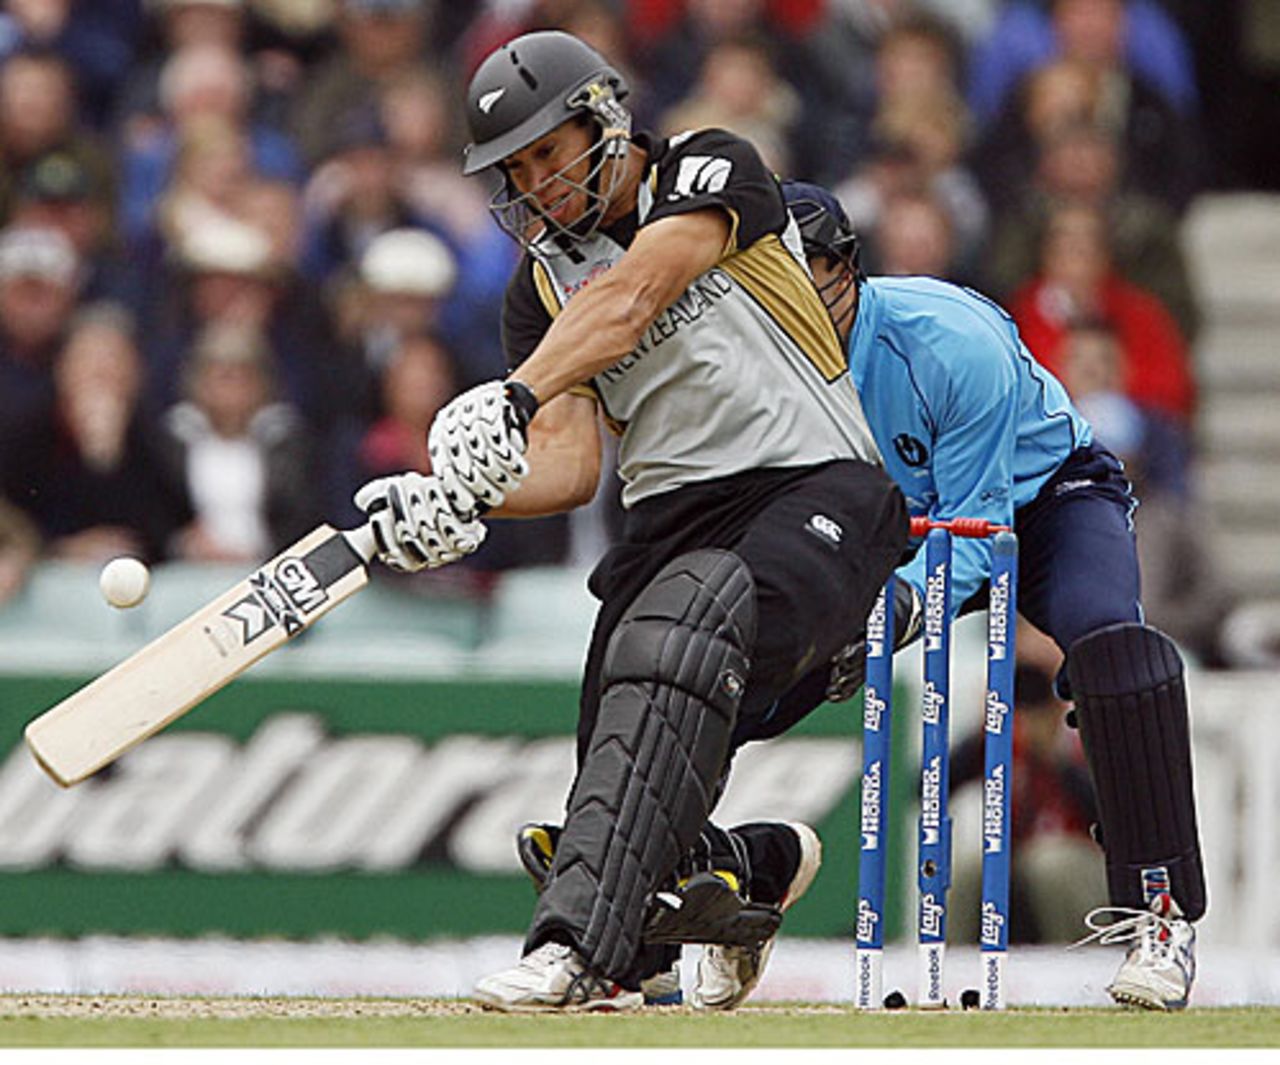 Ross Taylor goes over his favoured on-side region, New Zealand v Scotland, ICC World Twenty20, The Oval, June 6, 2009